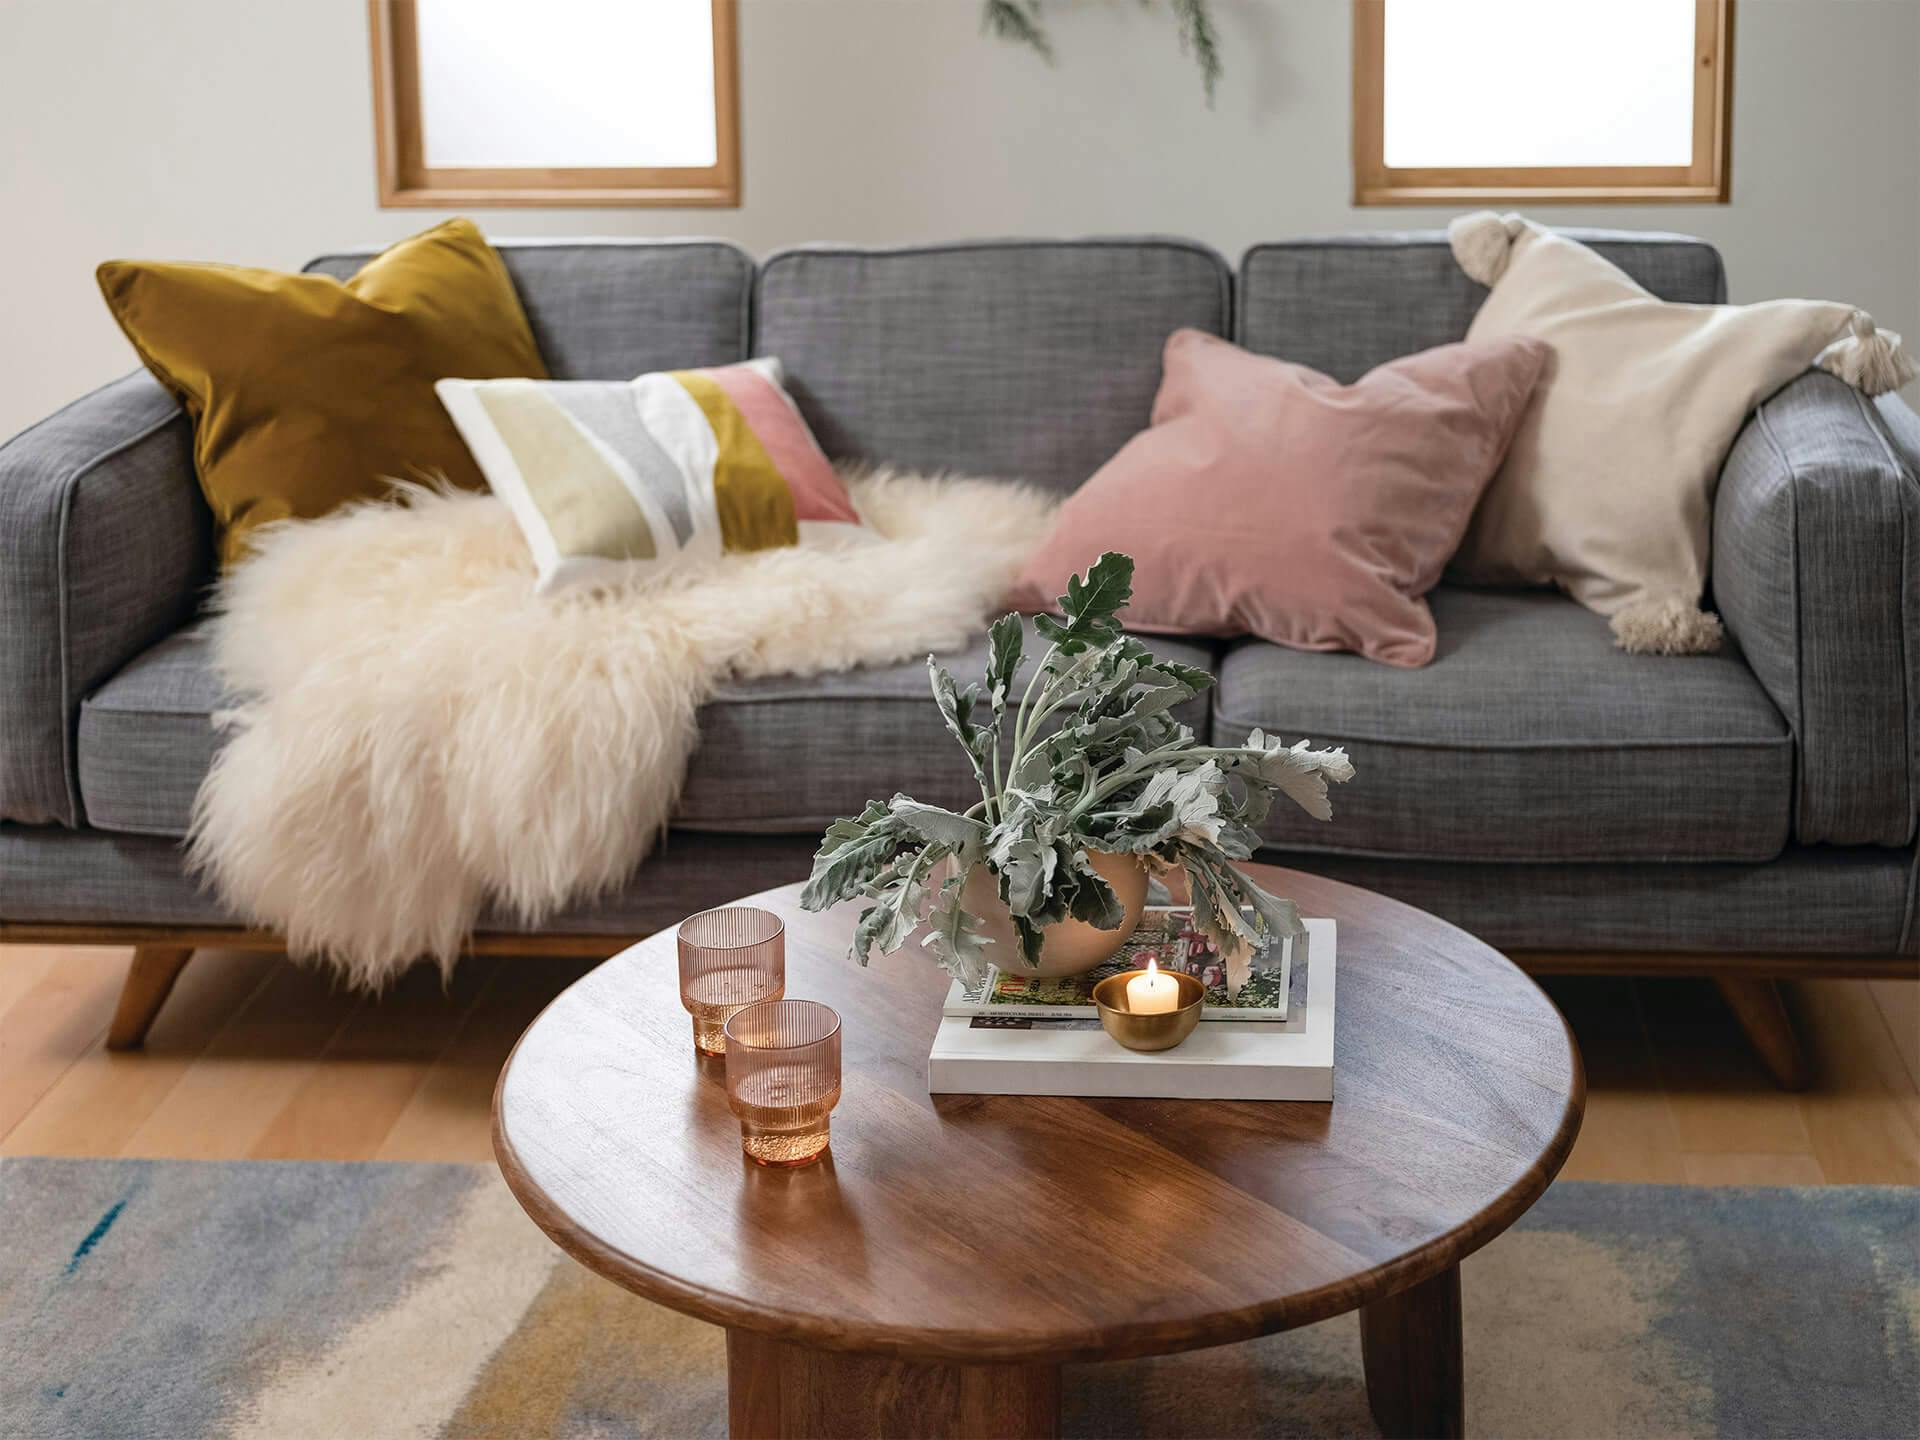 Living room setting, grey sofa with throw pillows and a round coffee table with plants and candle.